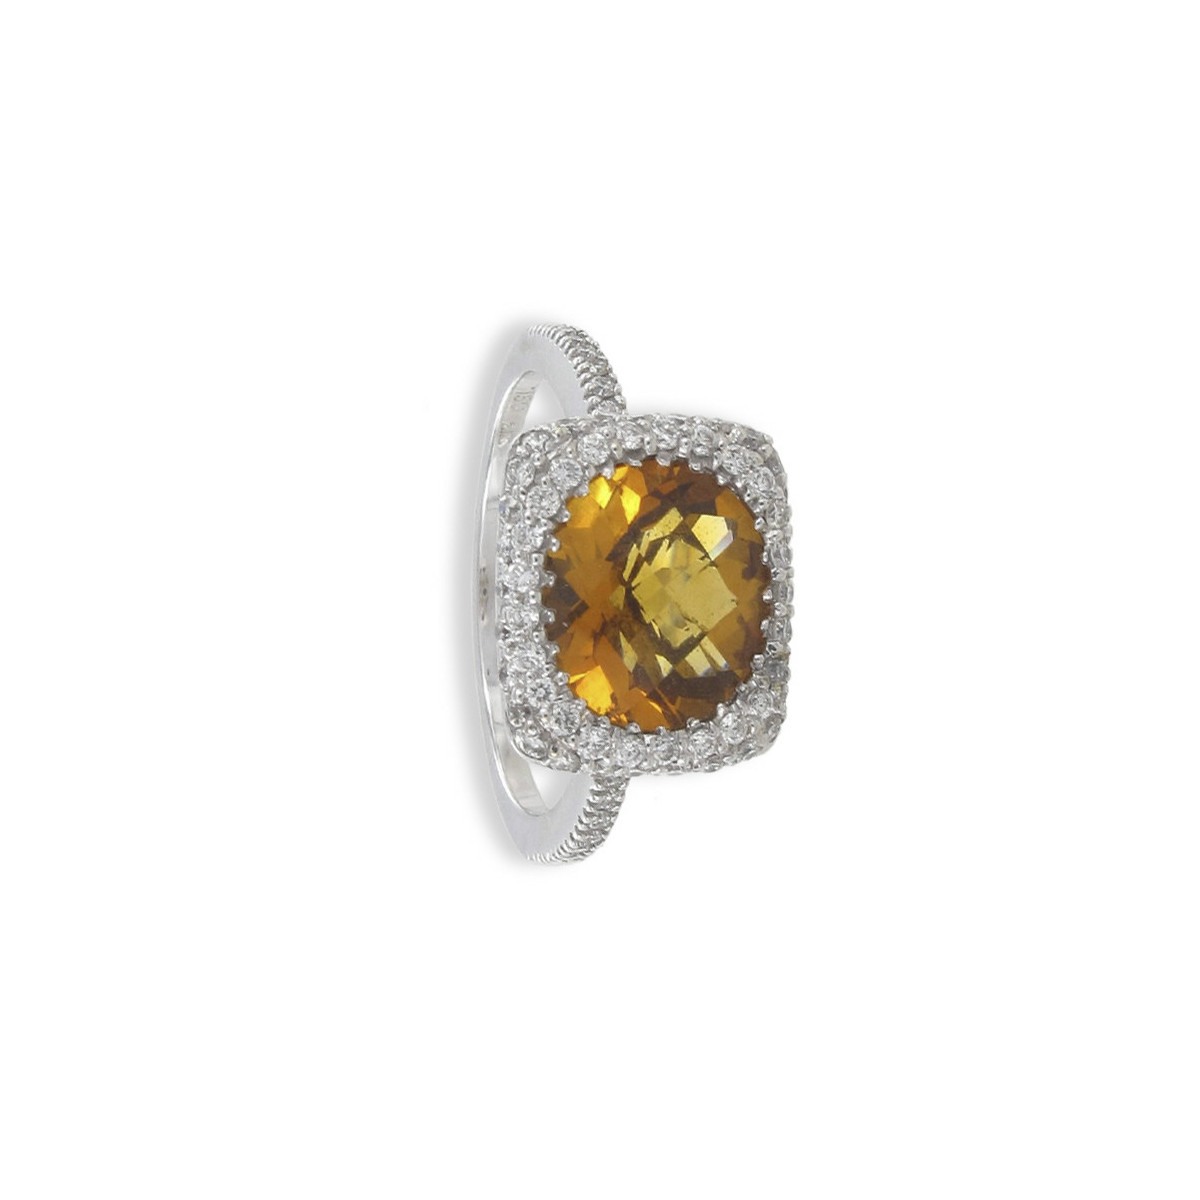 GOLD CITRINE AND 70 DIAMONDS RING